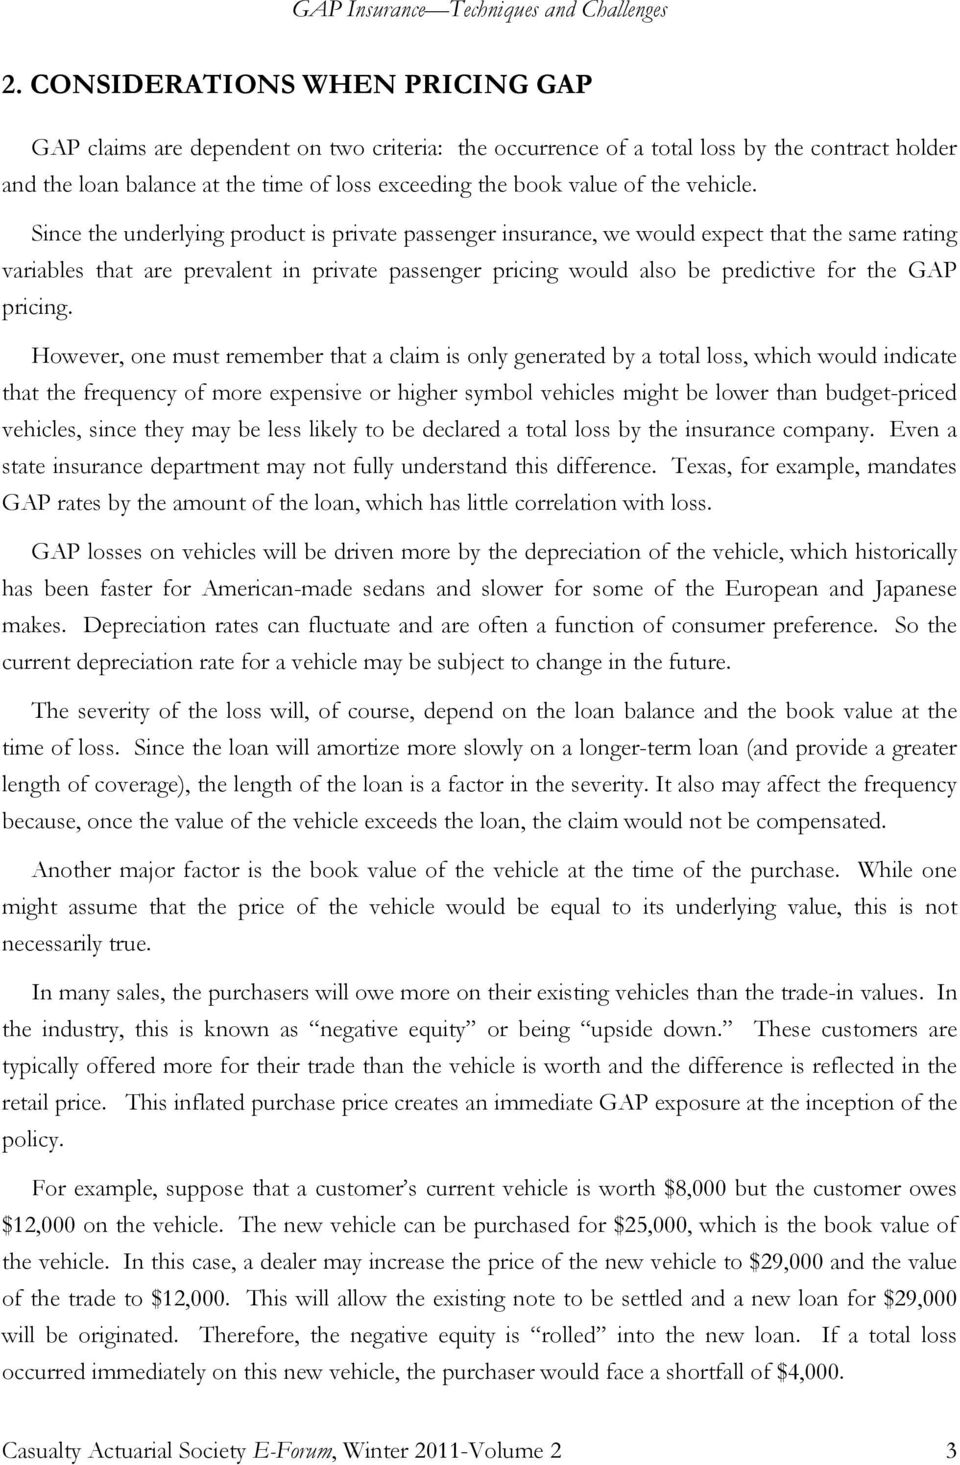 Since the underlying product is private passenger insurance, we would expect that the same rating variables that are prevalent in private passenger pricing would also be predictive for the GAP